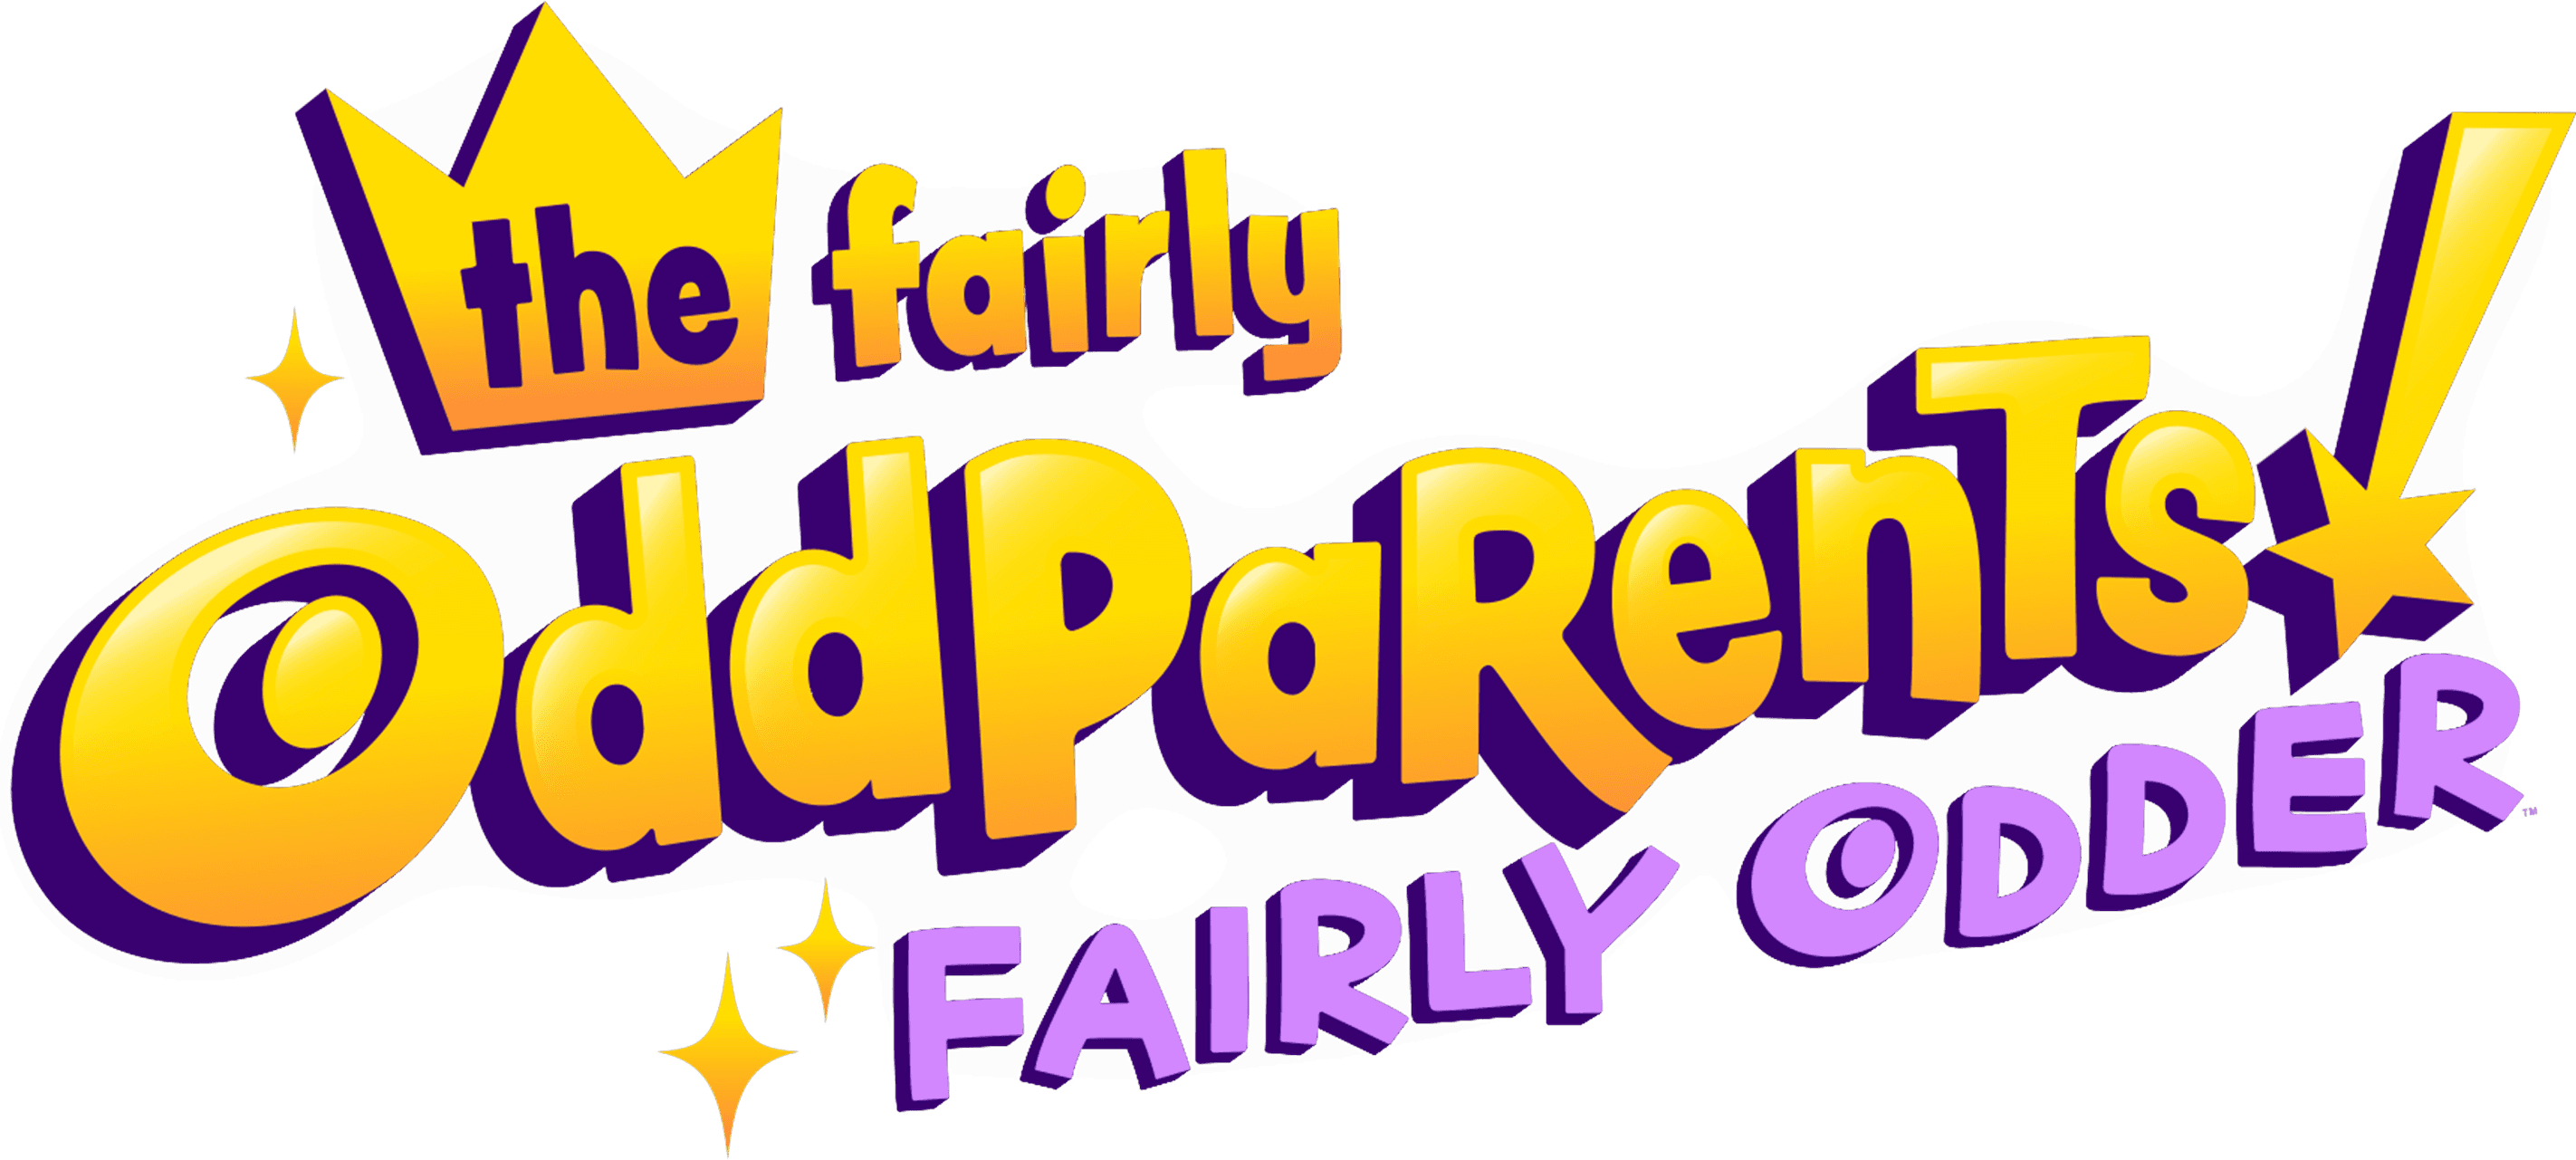 The Fairly OddParents: Fairly Odder logo